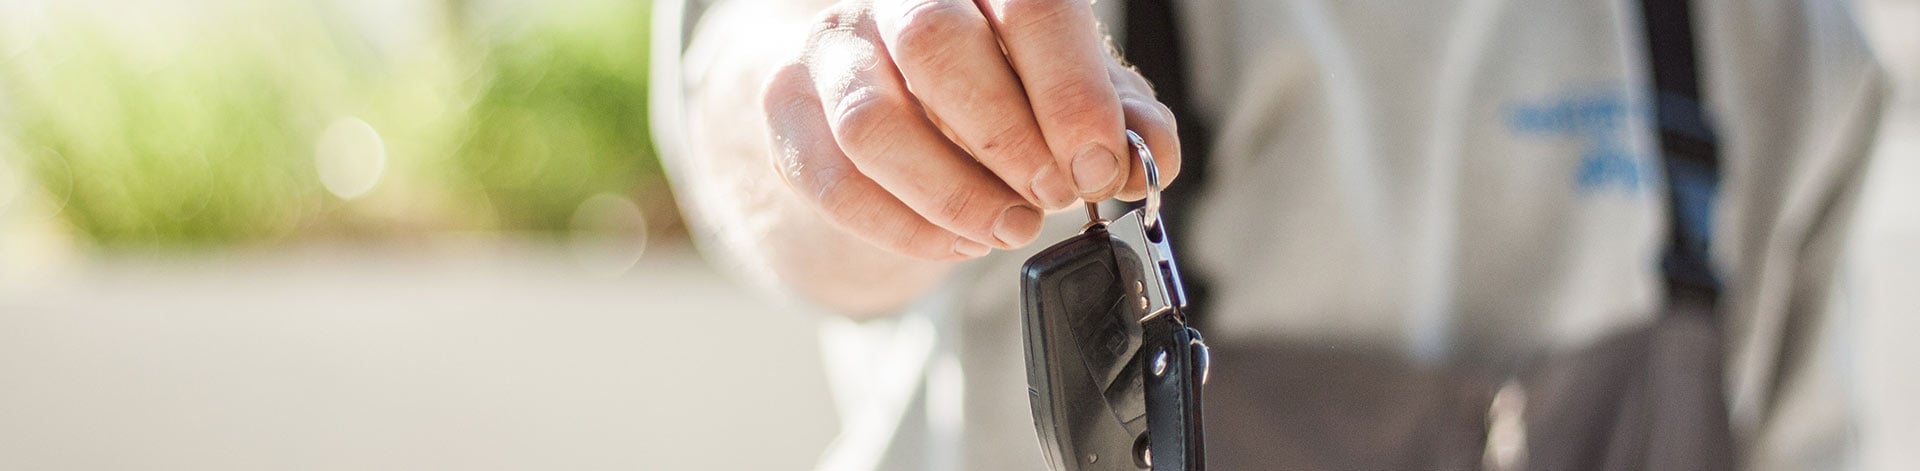 THE BEST 10 Locksmiths in Lakewood, CO